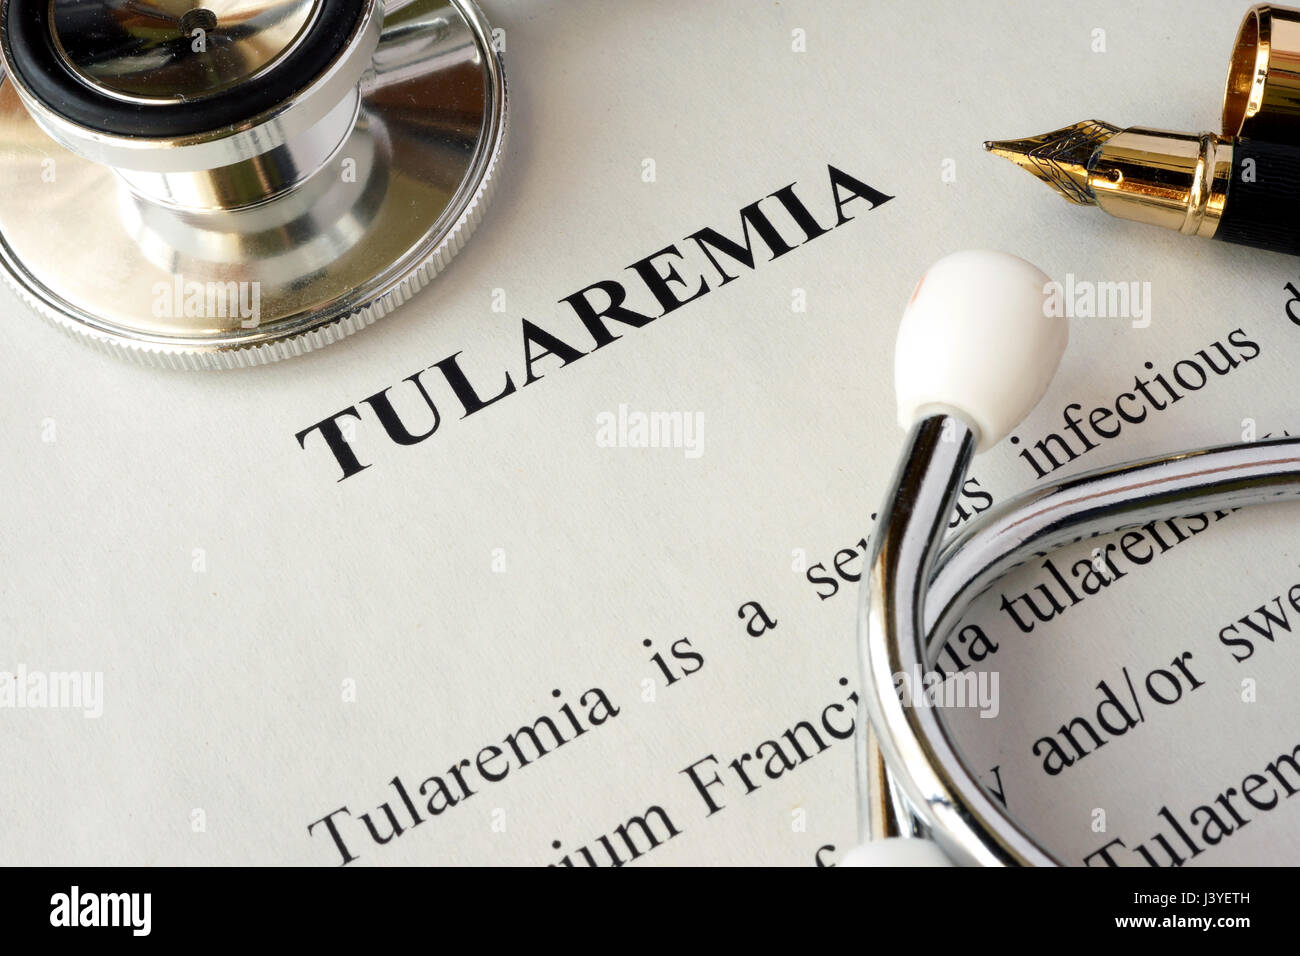 Page with title tularemia on a table. Stock Photo